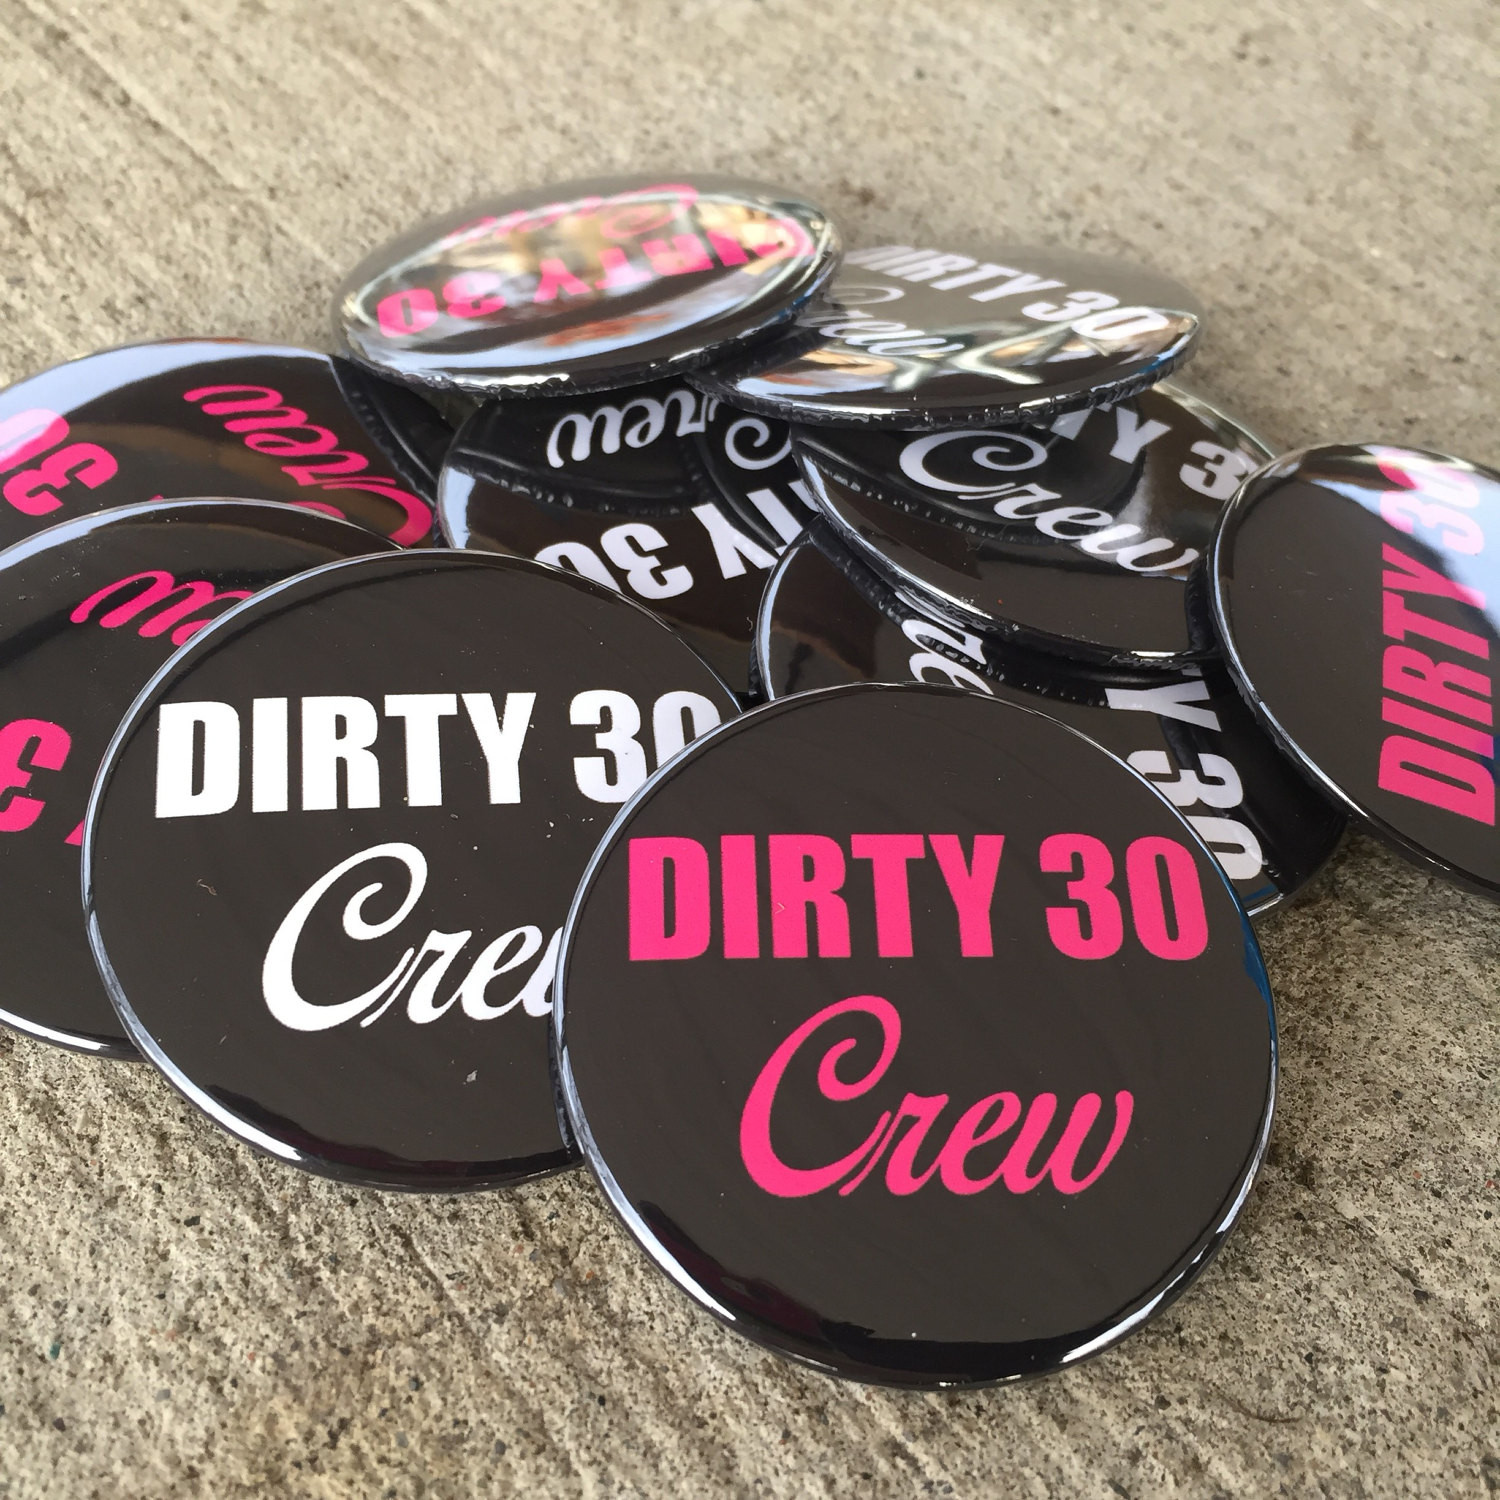 Dirty Thirty Birthday Party Ideas
 Dirty 30 Dirty 30 Crew Birthday Party 30th Birthday 30th